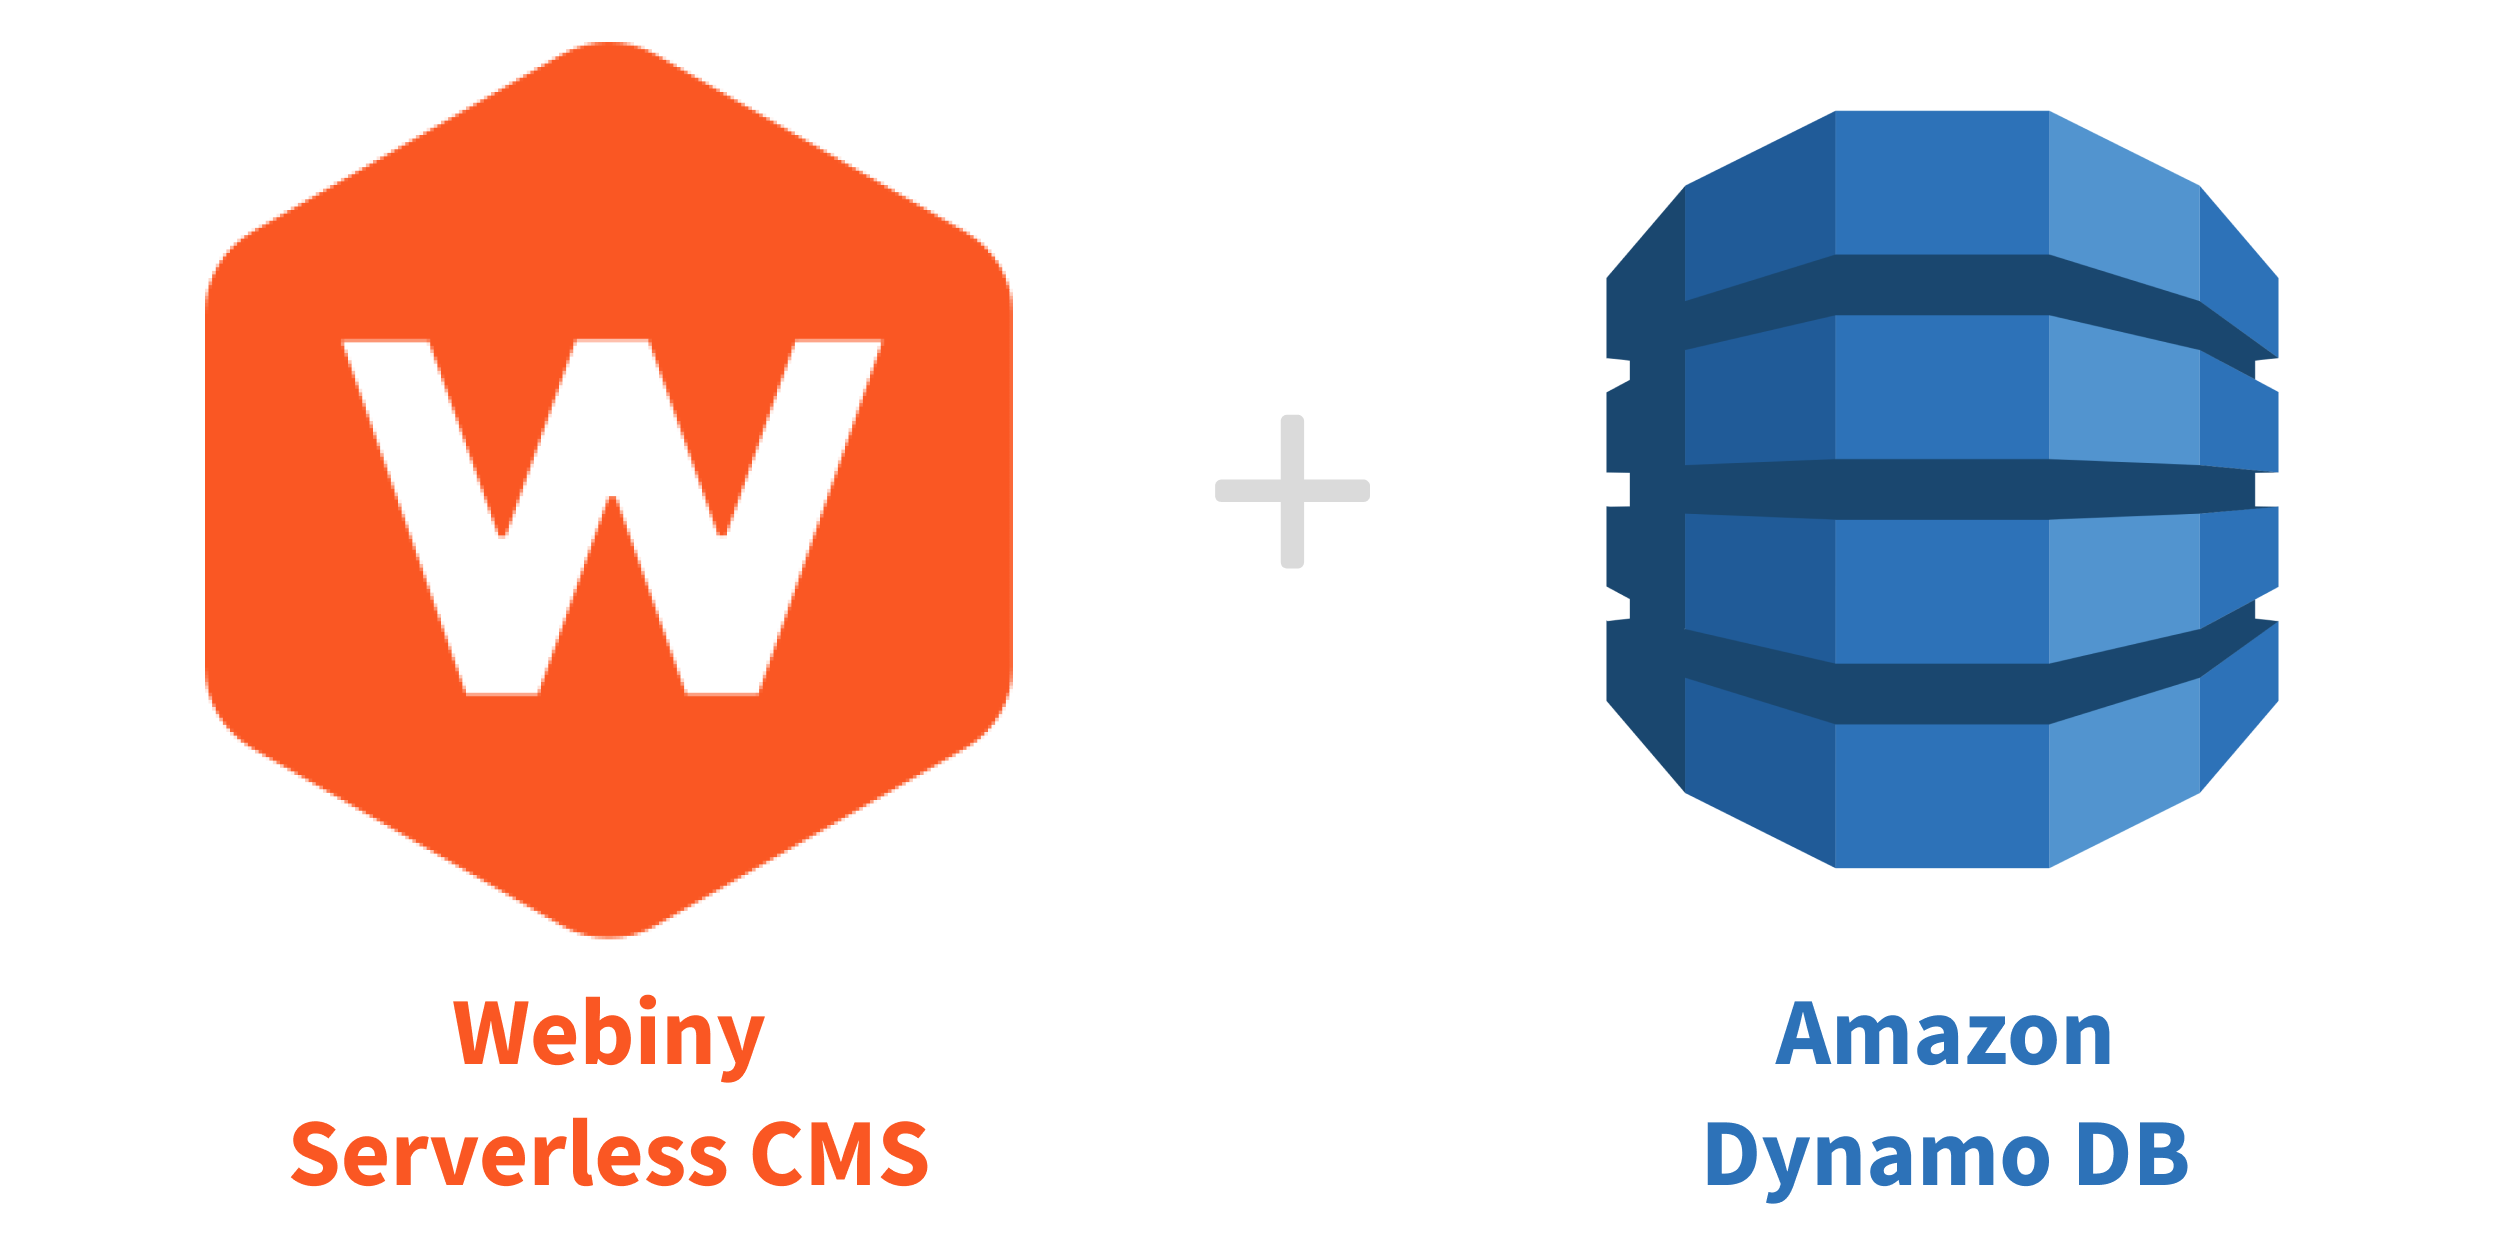 The highlight of this release - the new Amazon DynamoDB-only version of Webiny!